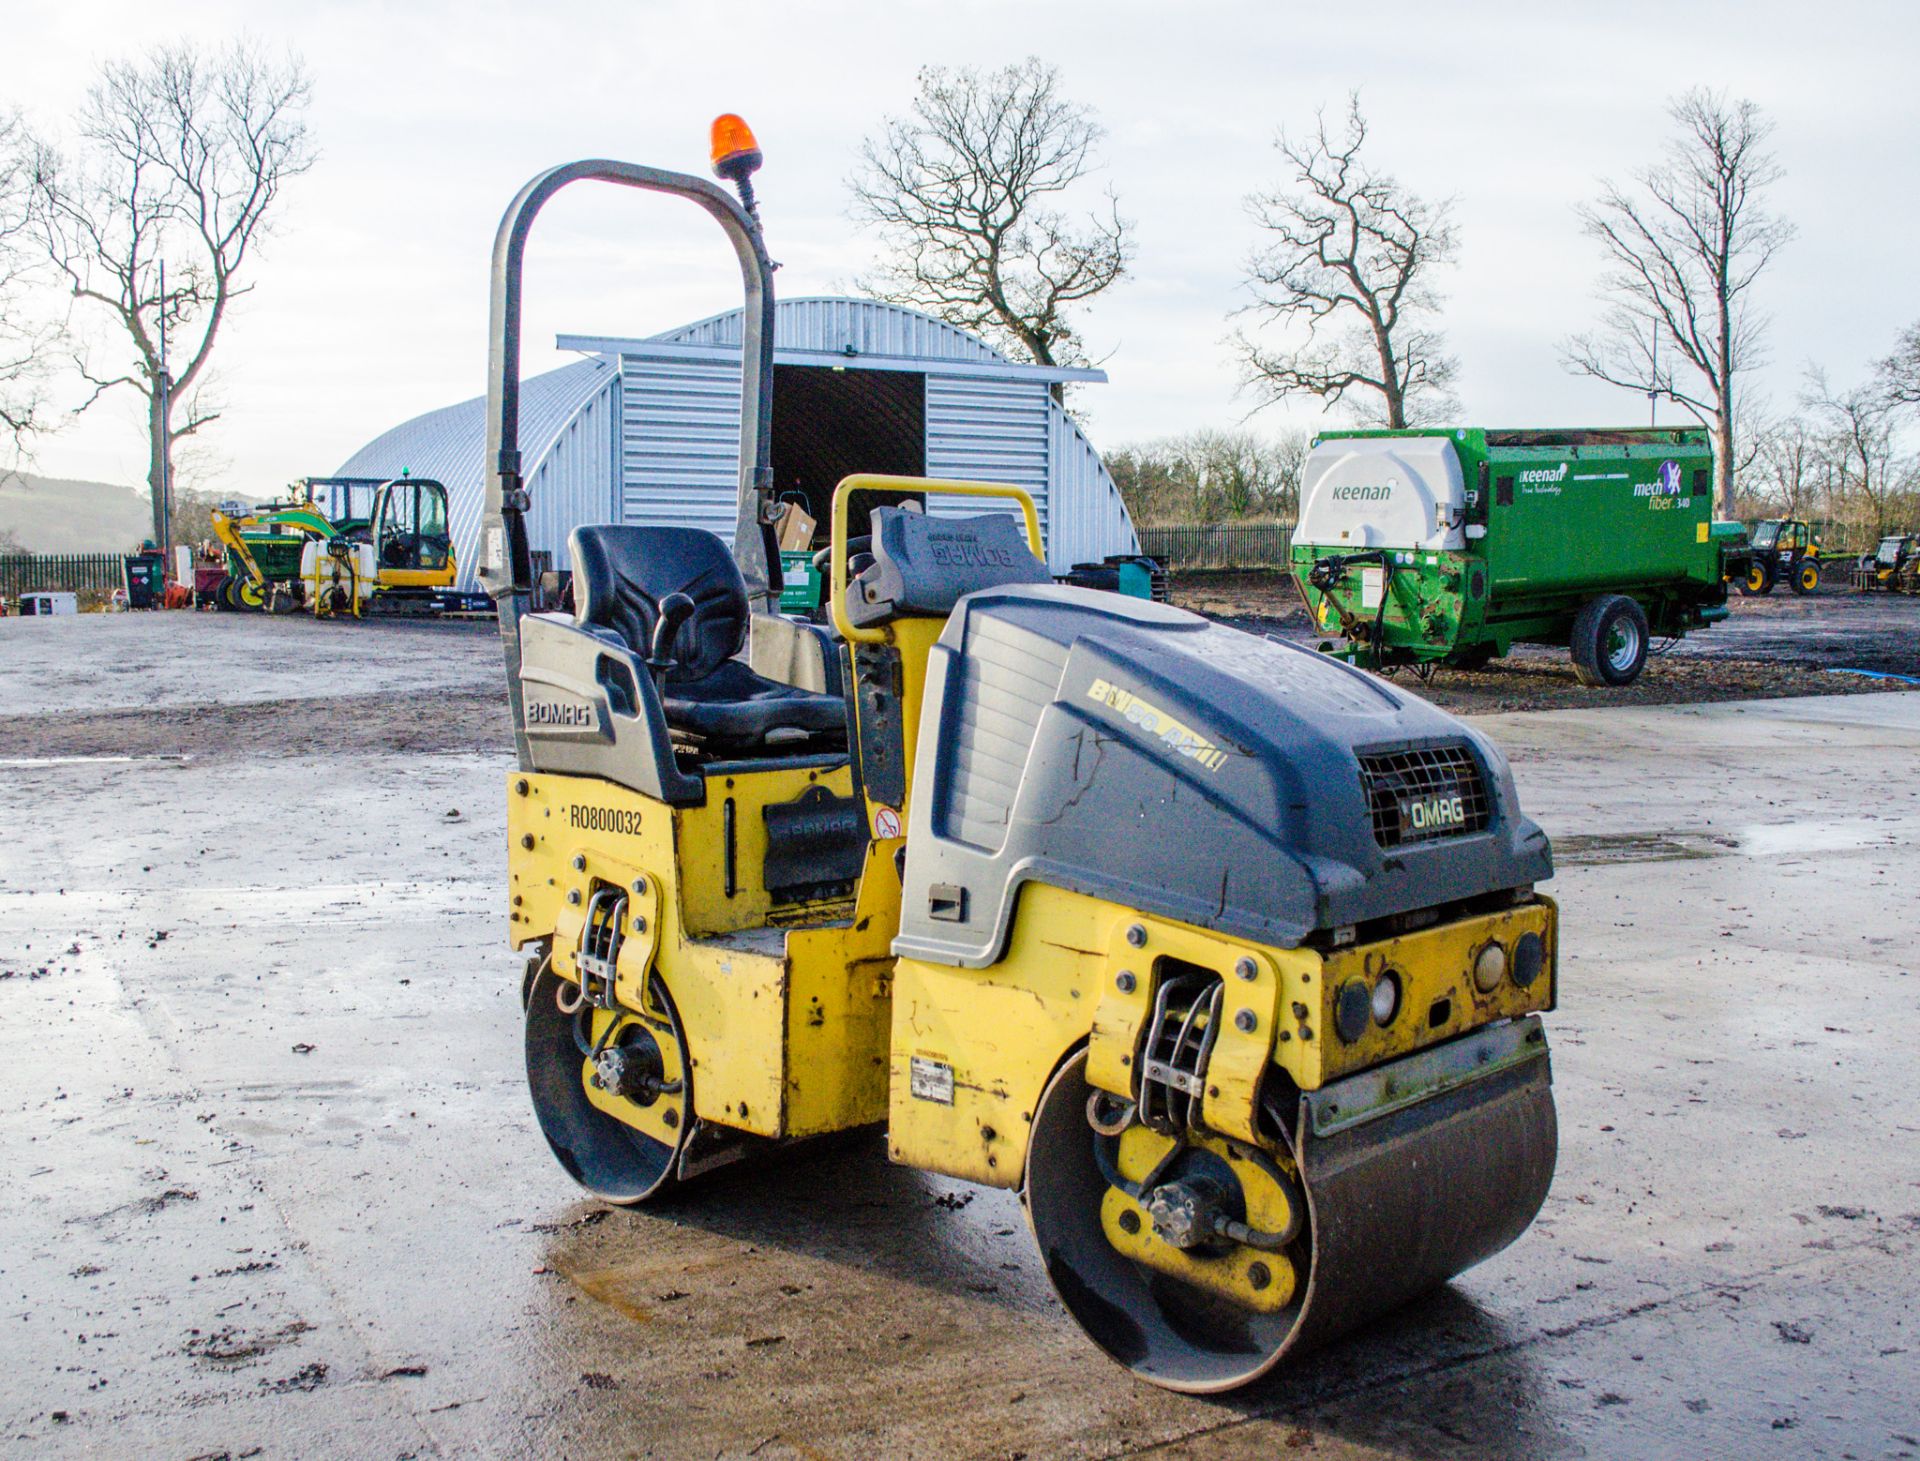 Bomag BW80 AD diesel driven roller Year: 2011 S/N: 1462001076 Recorded Hours: 1818 - Image 2 of 16